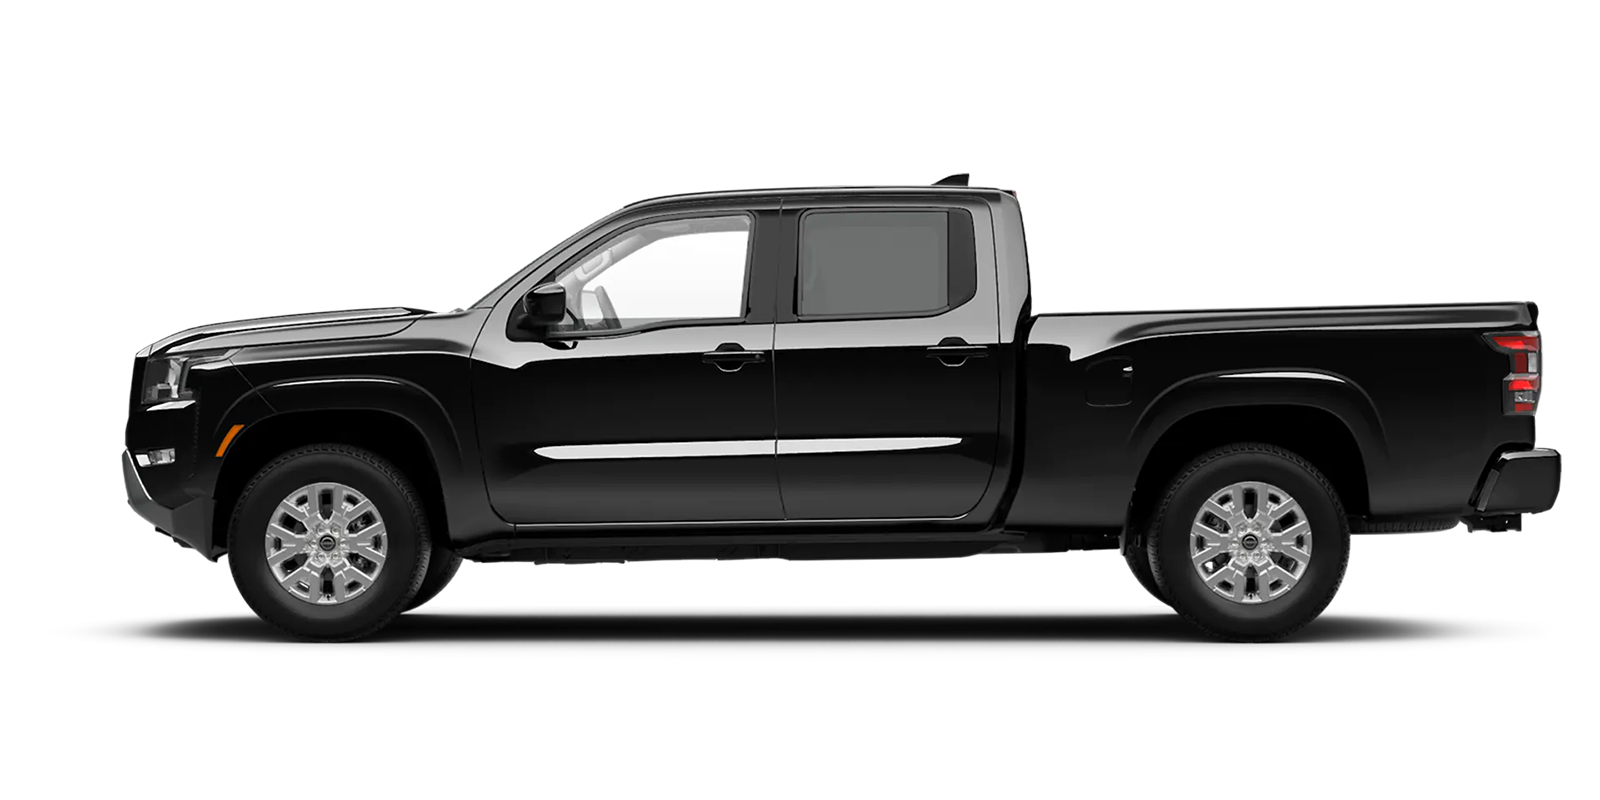 2022 Frontier Crew Cab Long Bed SV 4x4 in Super Black | Nissan City of Springfield in Springfield NJ